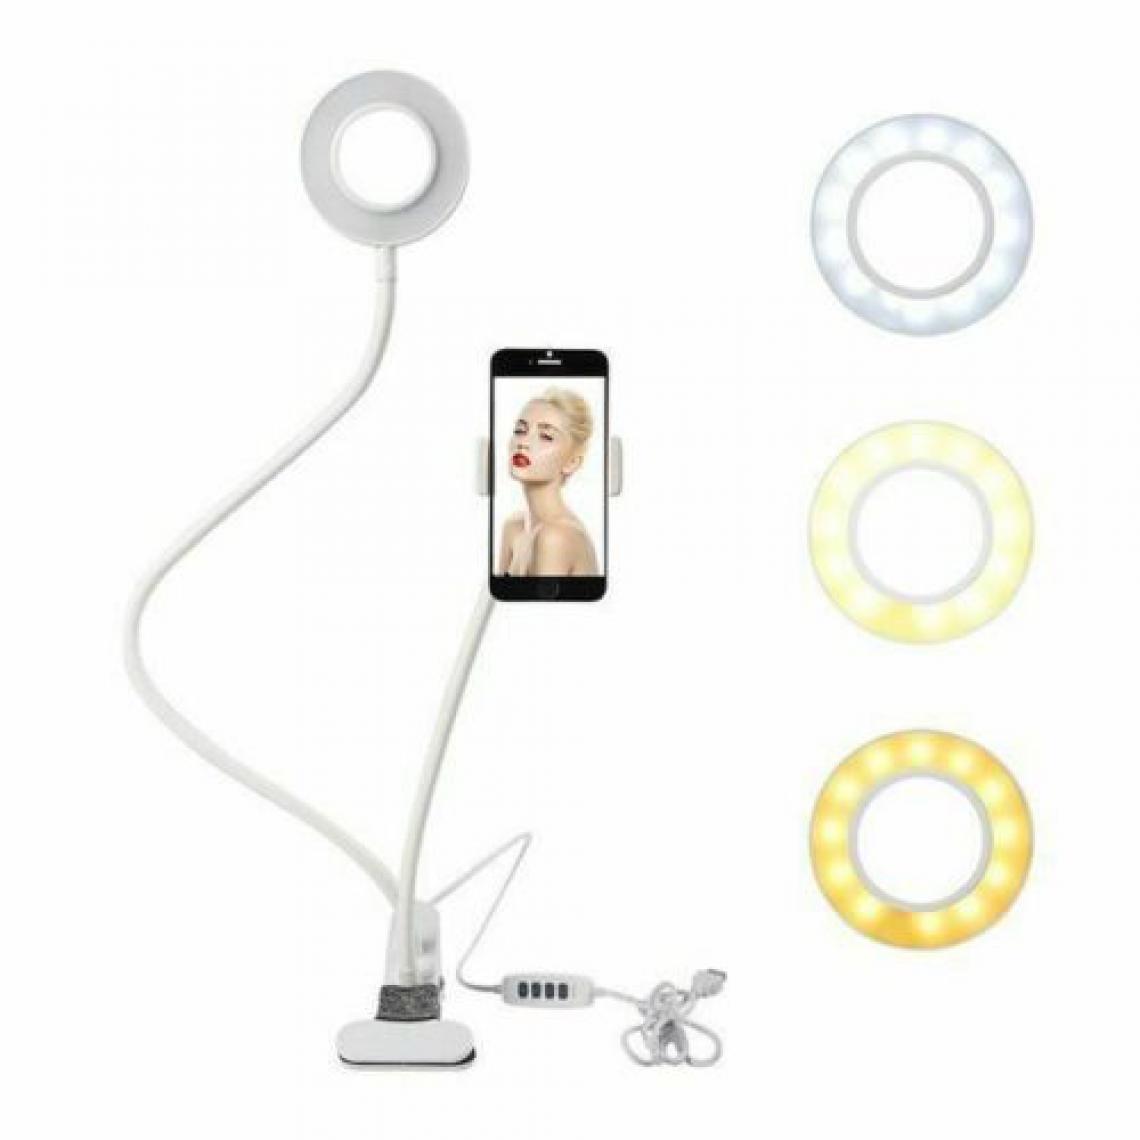 Ozzzo - Stand support bureau selfie led ozzzo blanc pour SAMSUNG G930 Galaxy S7 - Station d'accueil smartphone